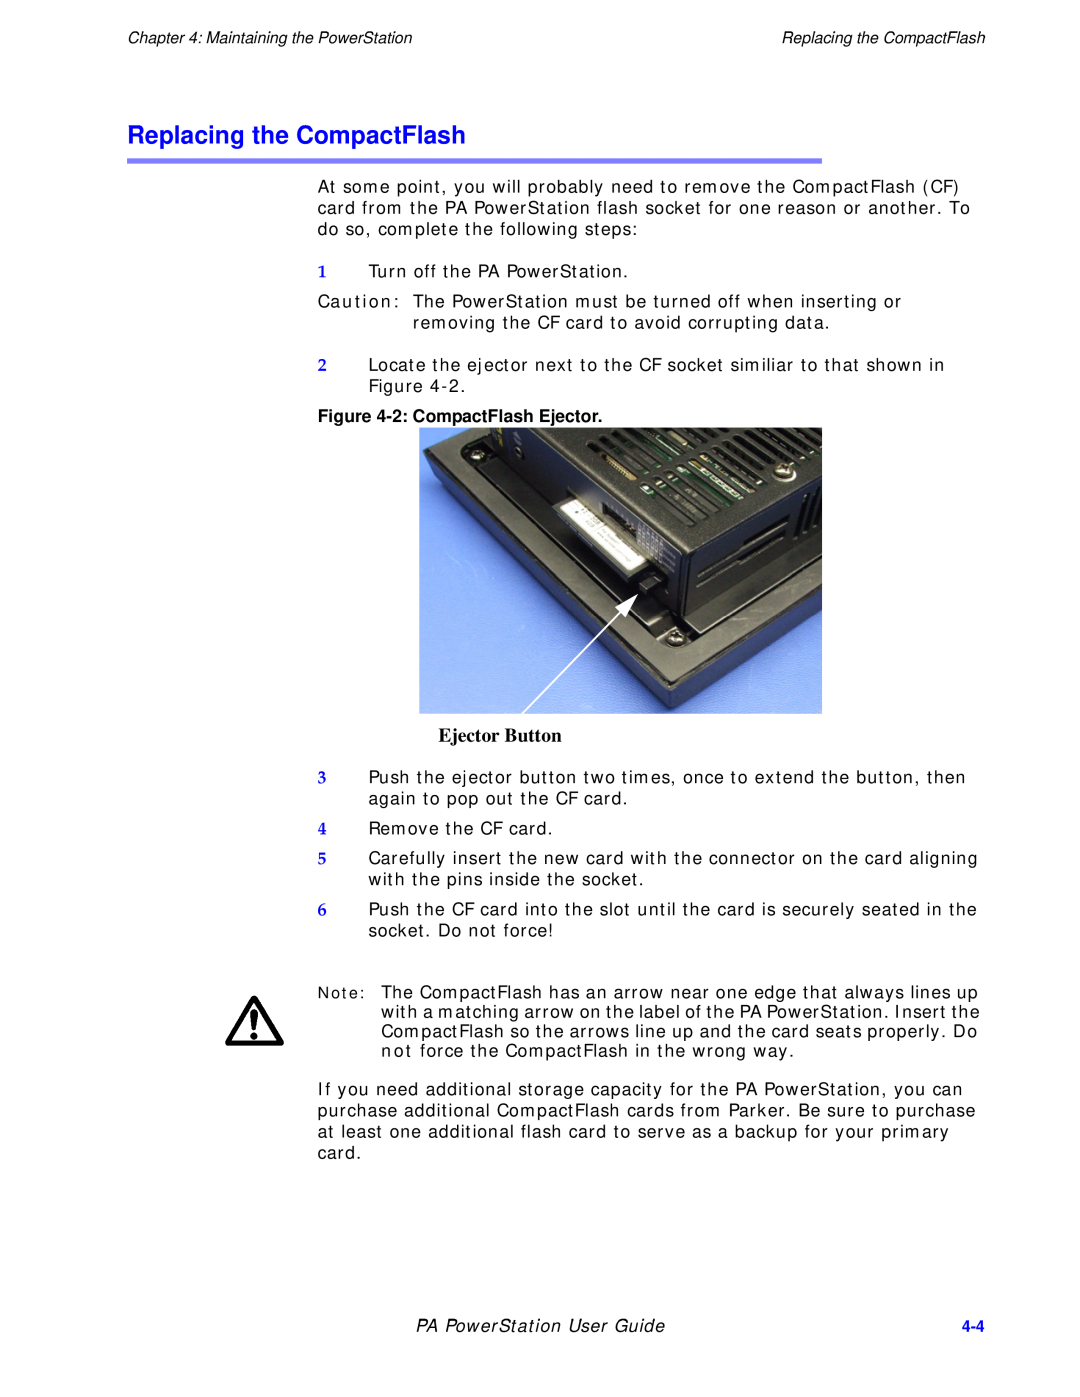 Parker Hannifin PA Series manual Replacing the CompactFlash, Ejector Button, PA PowerStation User Guide 